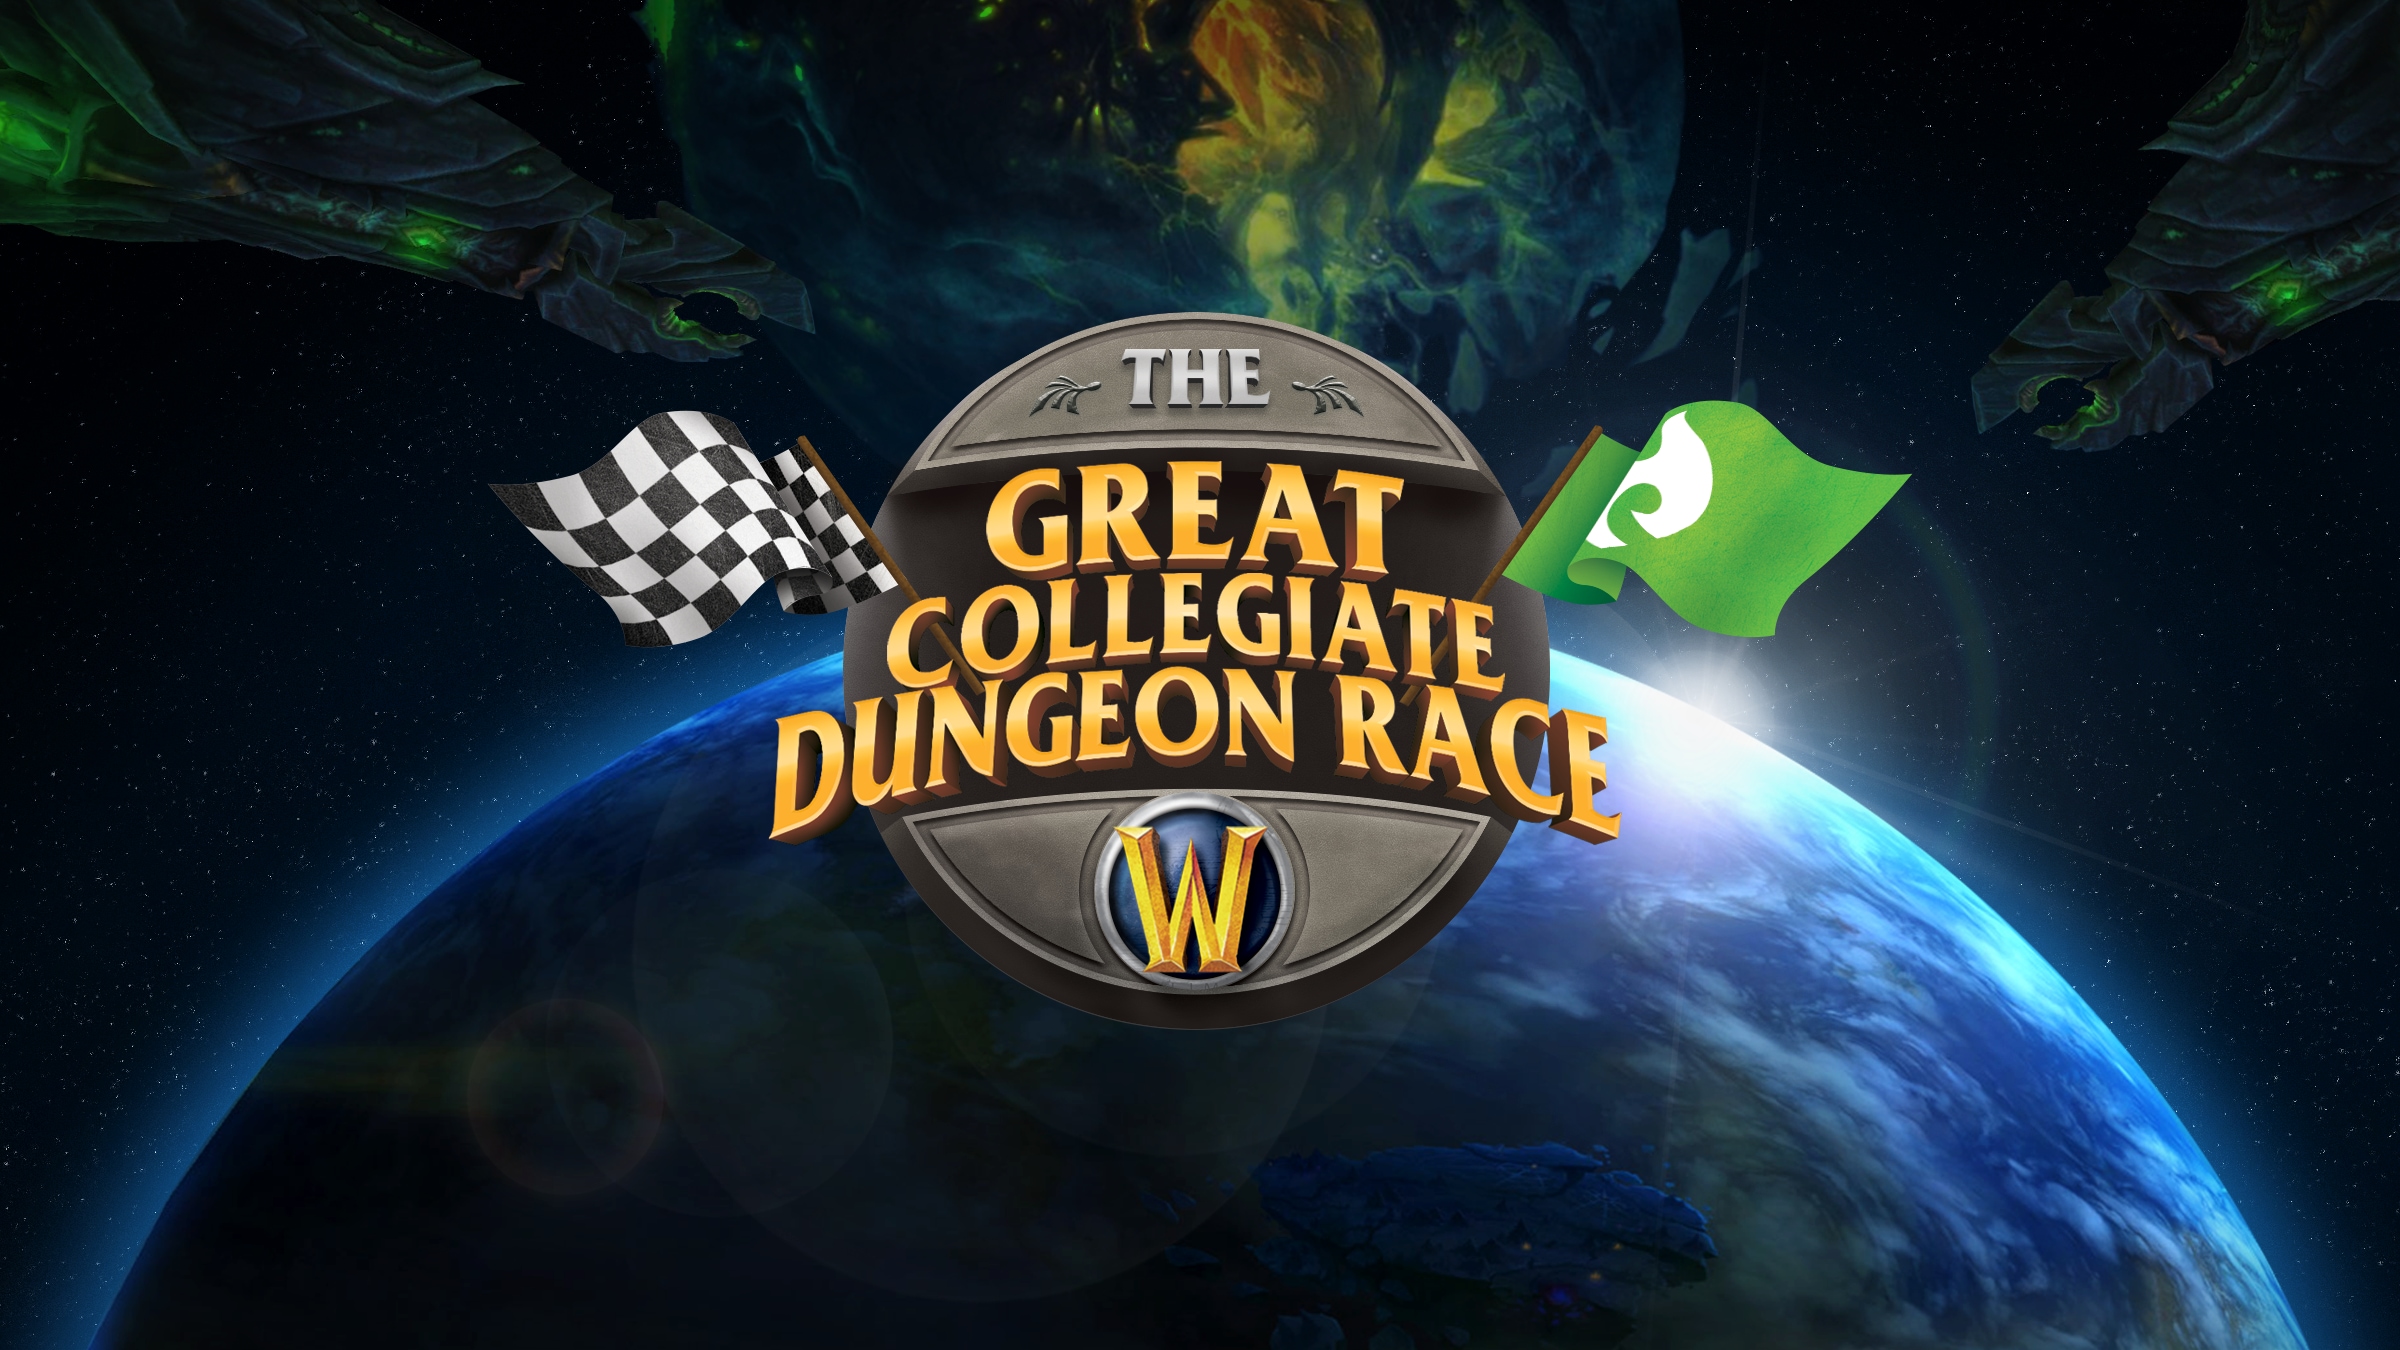 Join The Great Collegiate Dungeon Race 2017!